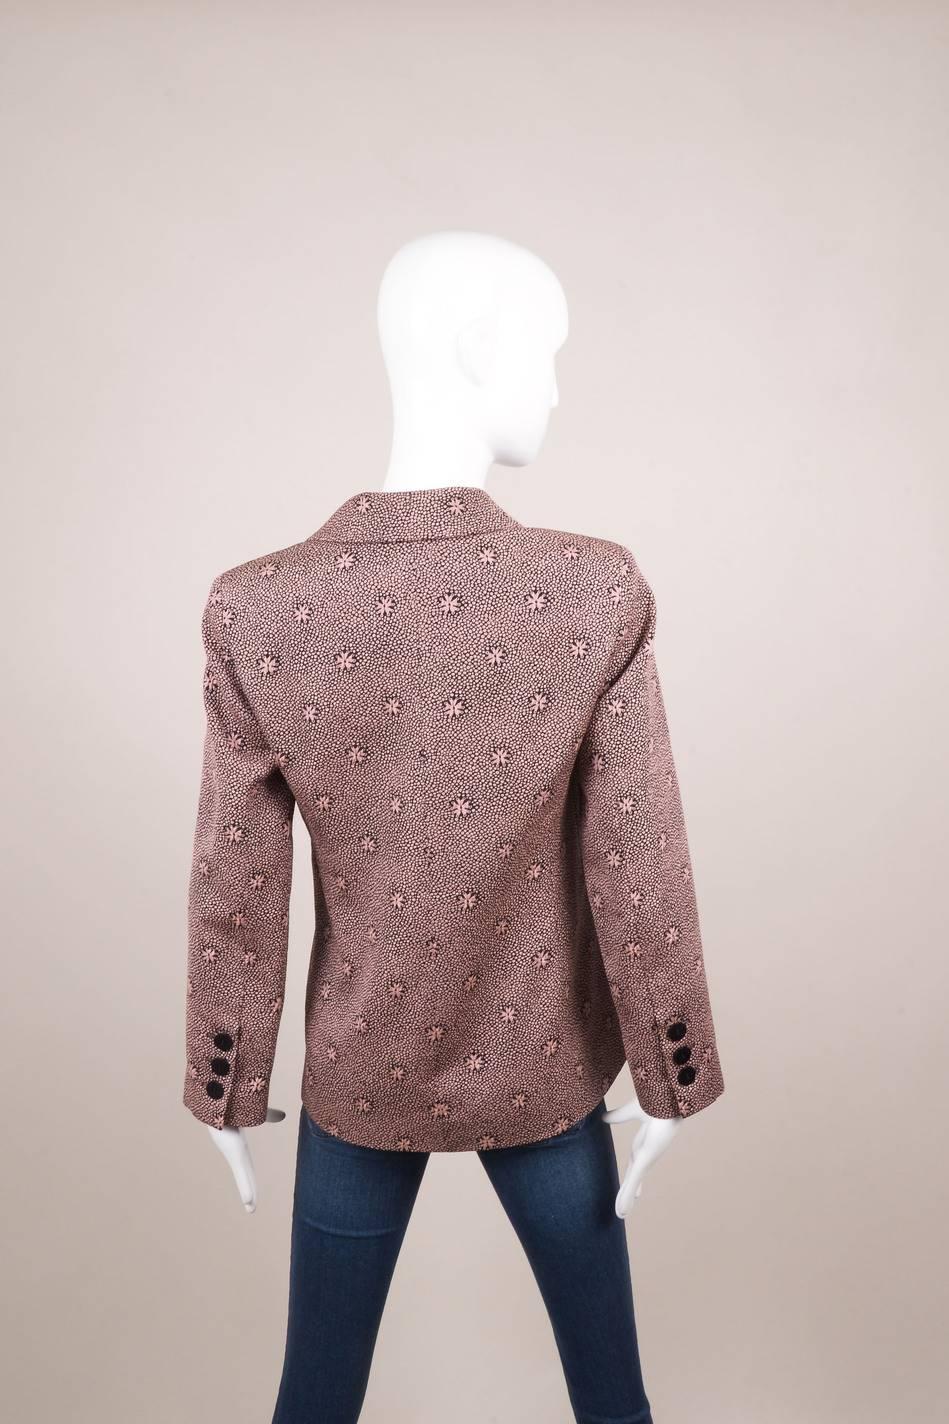 This long sleeved jacket features a star burst and dot print detail throughout with peak lapels.and a front double breasted button closure. Front slit pockets. Button detail on sleeves. Padded shoulders. Lined.

Additional Measurements:
Sleeve